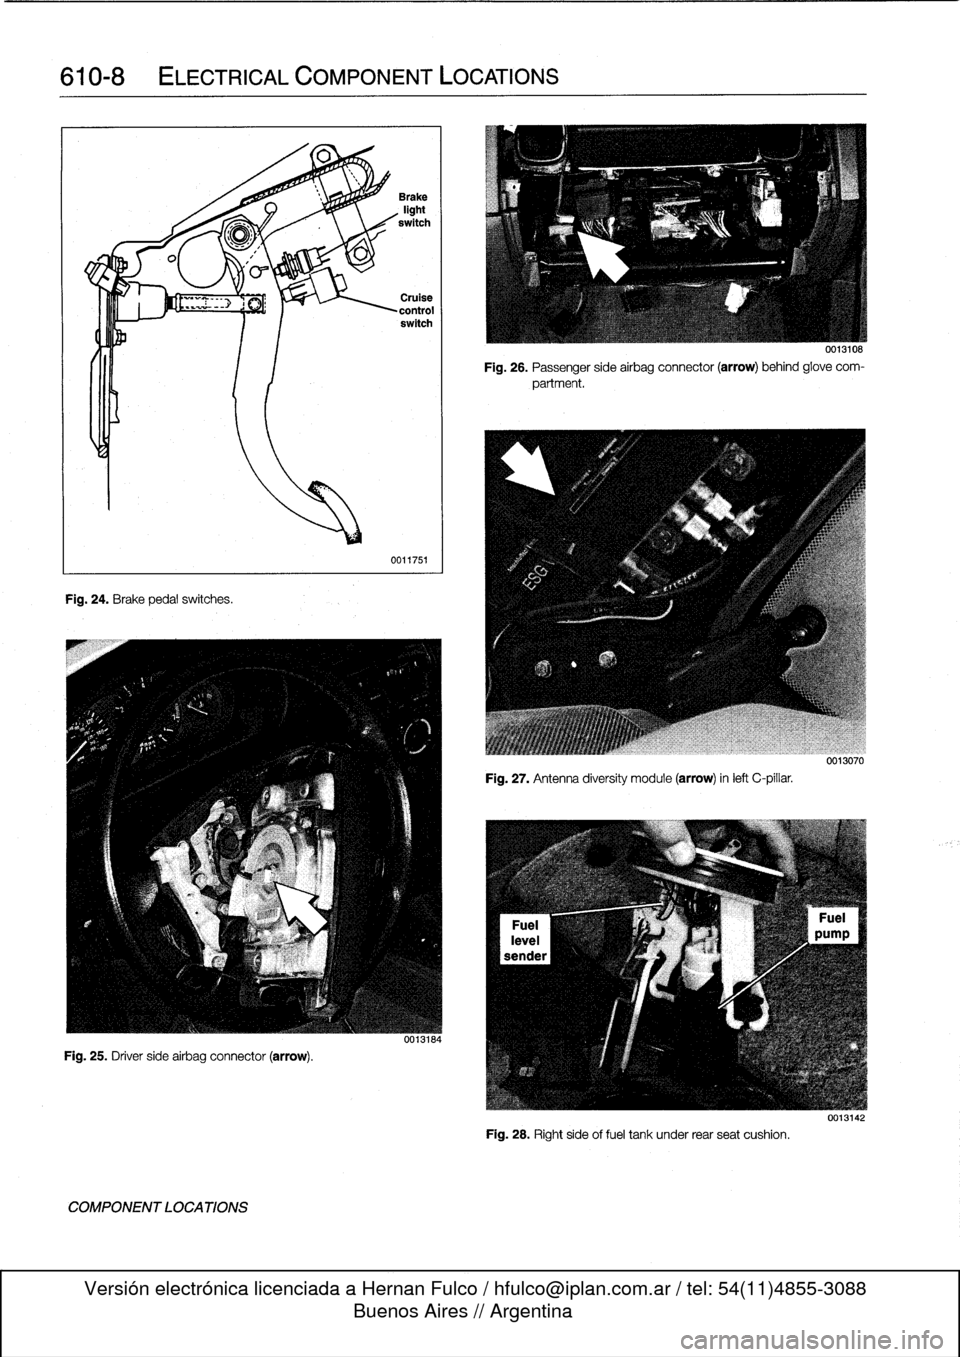 BMW 318i 1997 E36 Owners Guide 
610-$

	

ELECTRICAL
COMPONENT
LOCATIONS

Fig
.
24
.
Brake
pedalswitches
.

Fig
.
25
.
Driver
side
airbag
connector
(arrow)
.

COMPONENT
LOCATIONS

0011751

Fig
.
26
.
Passenger
sideairbag
connector
